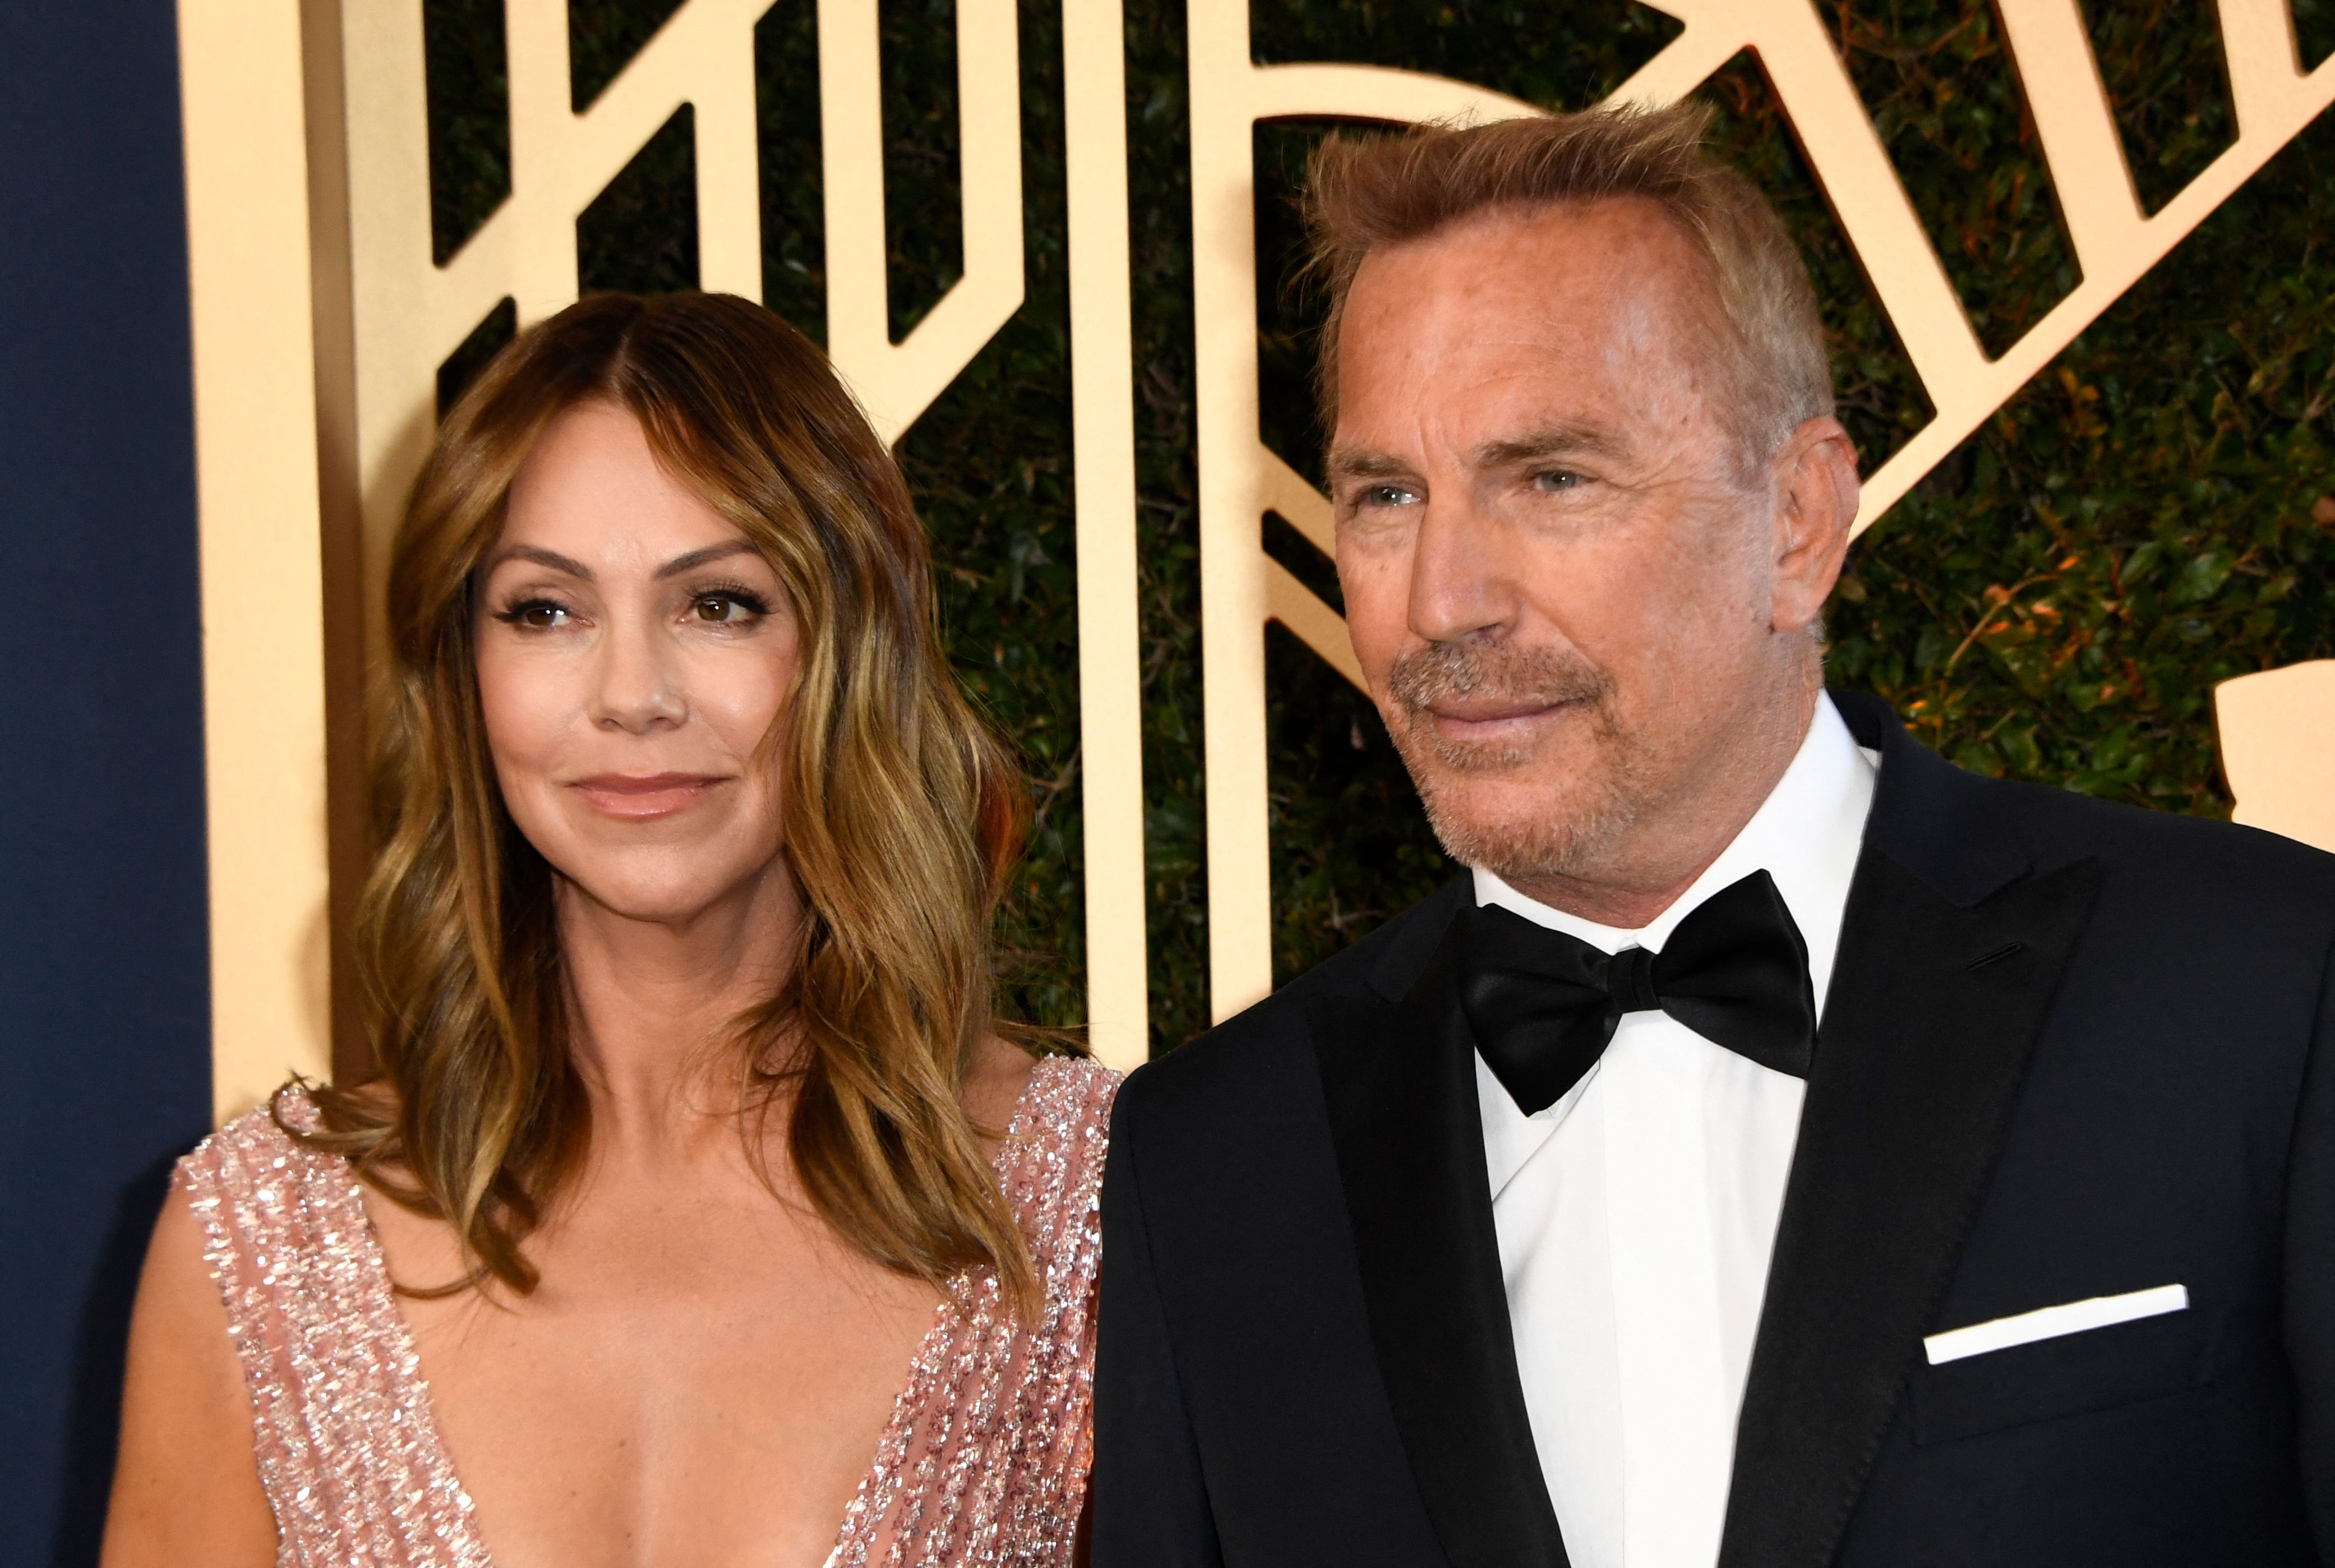 Christine Baumgartner and Kevin Costner arrive for the 28th Annual Screen Actors Guild (SAG) Awards in Santa Monica, California, on February 27, 2022. | Source: Getty Images